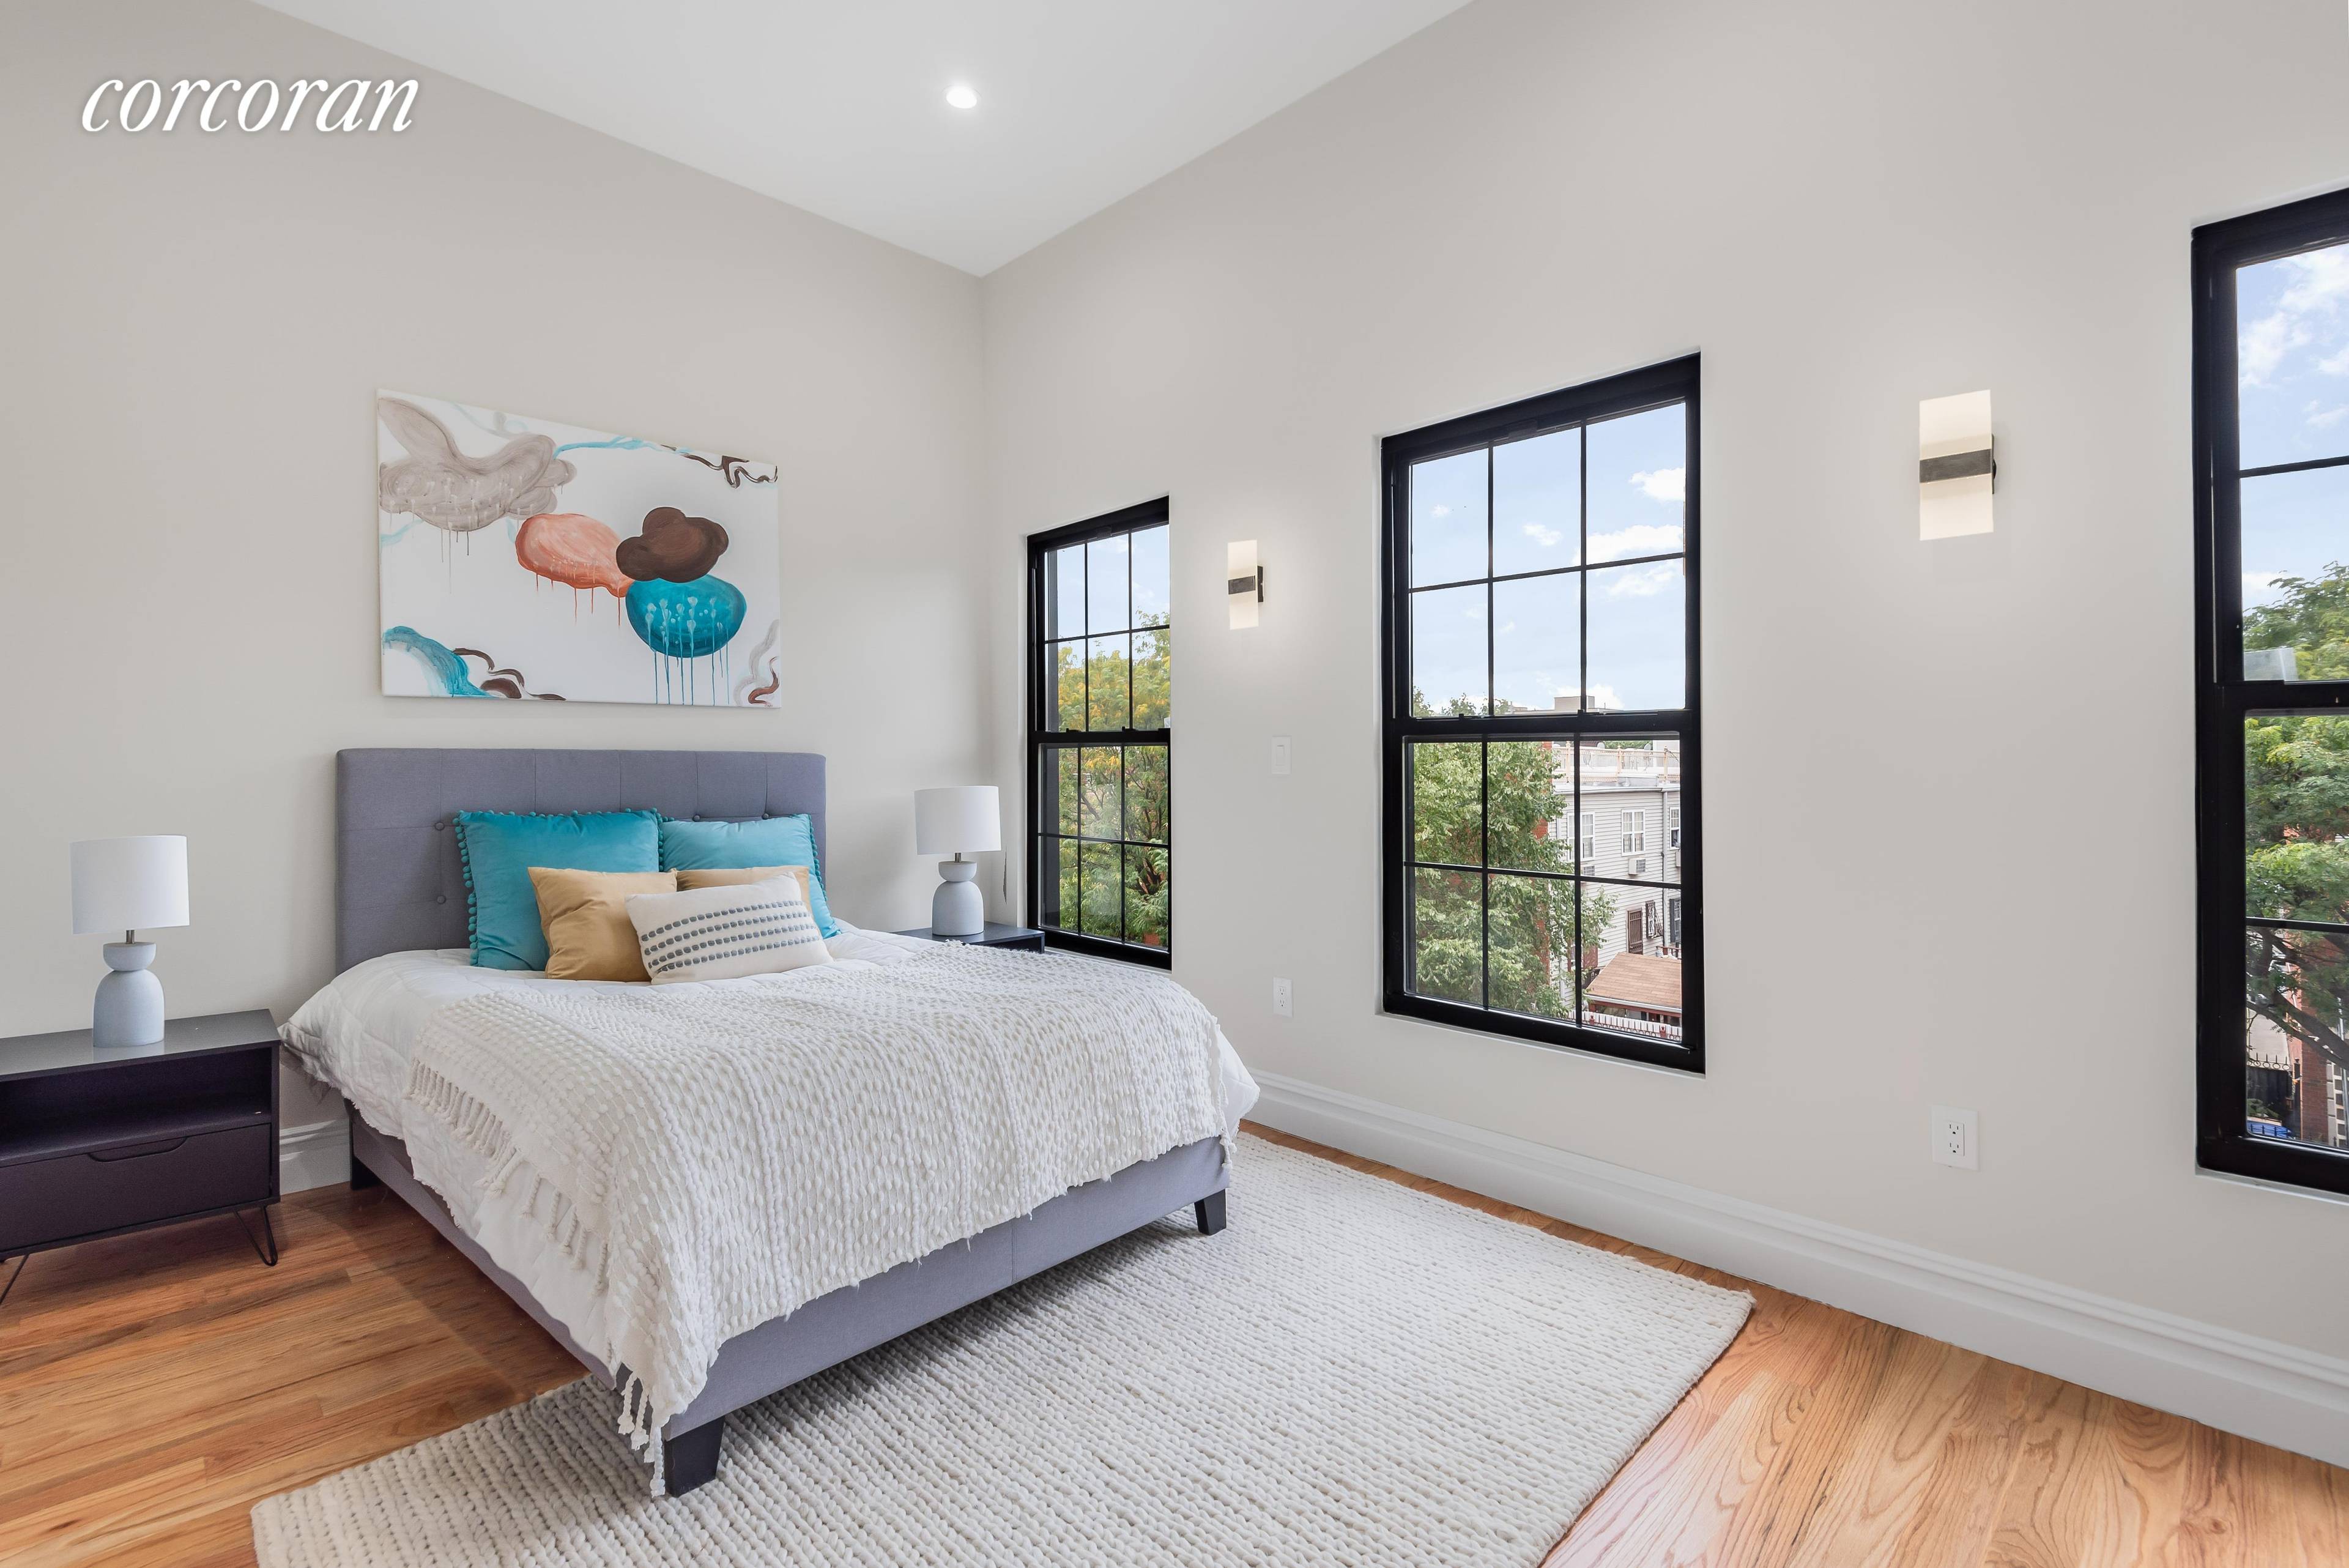 Welcome to 182, a beautiful, 2400 sq ft, two family townhouse, situated in the heart of burgeoning Bushwick !